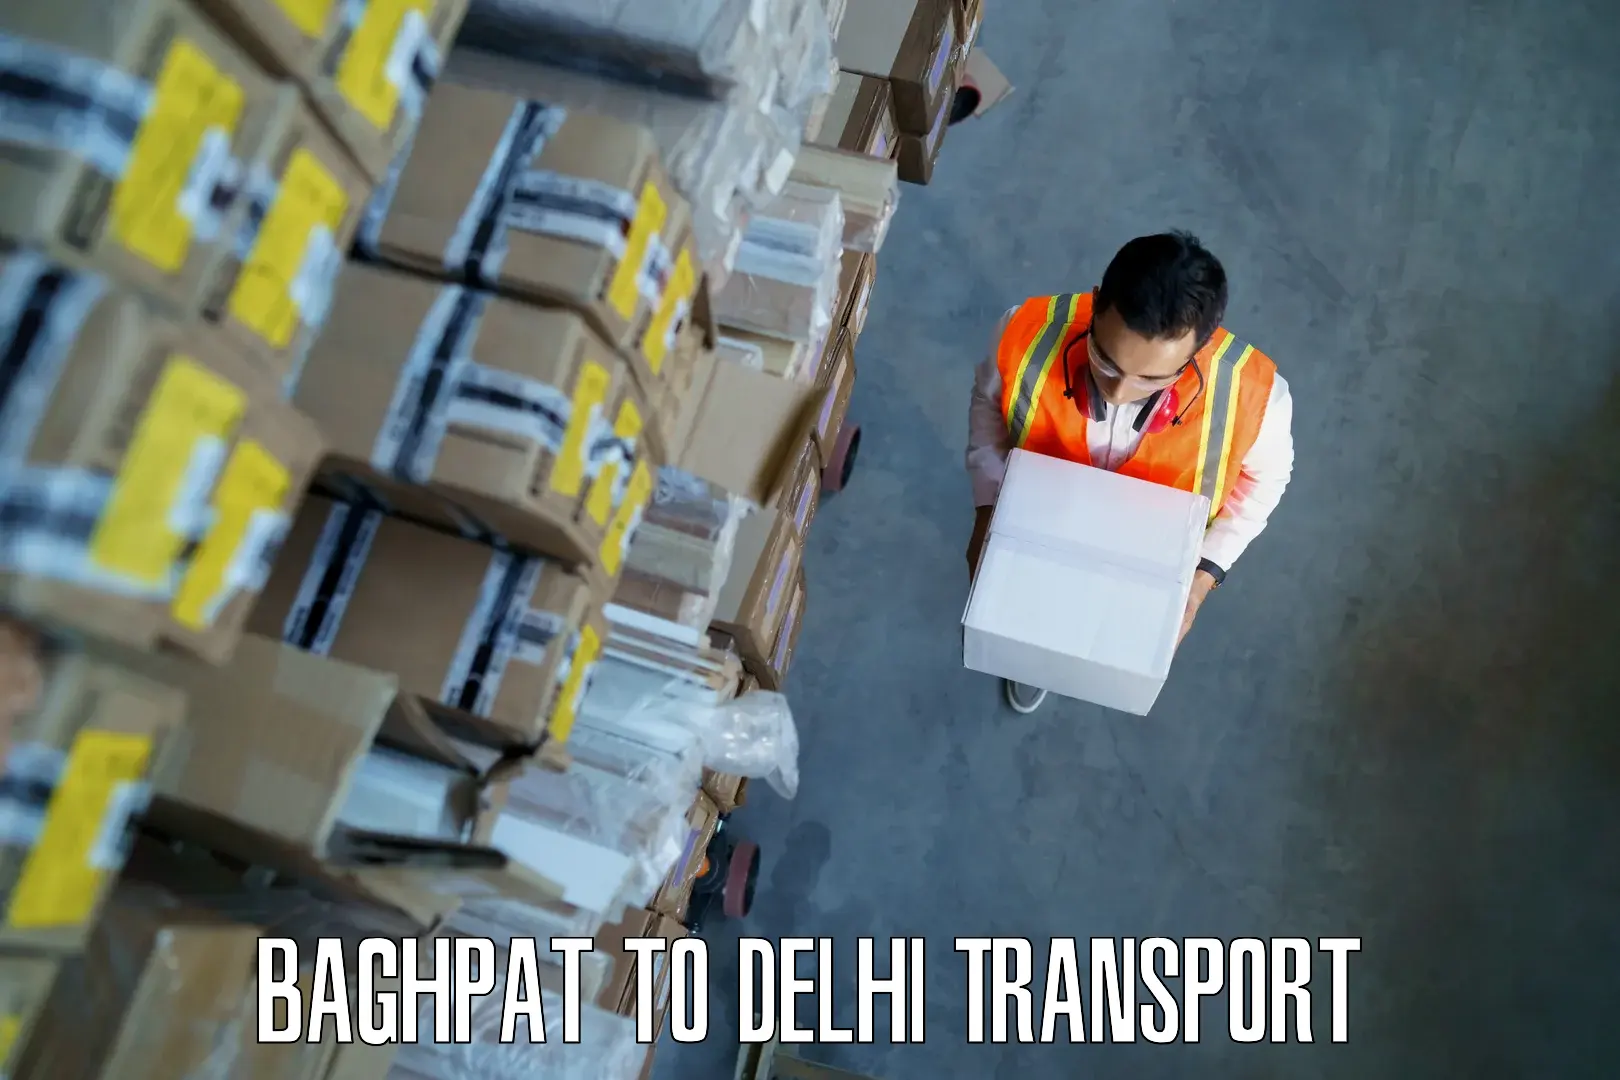 Nearby transport service Baghpat to NIT Delhi